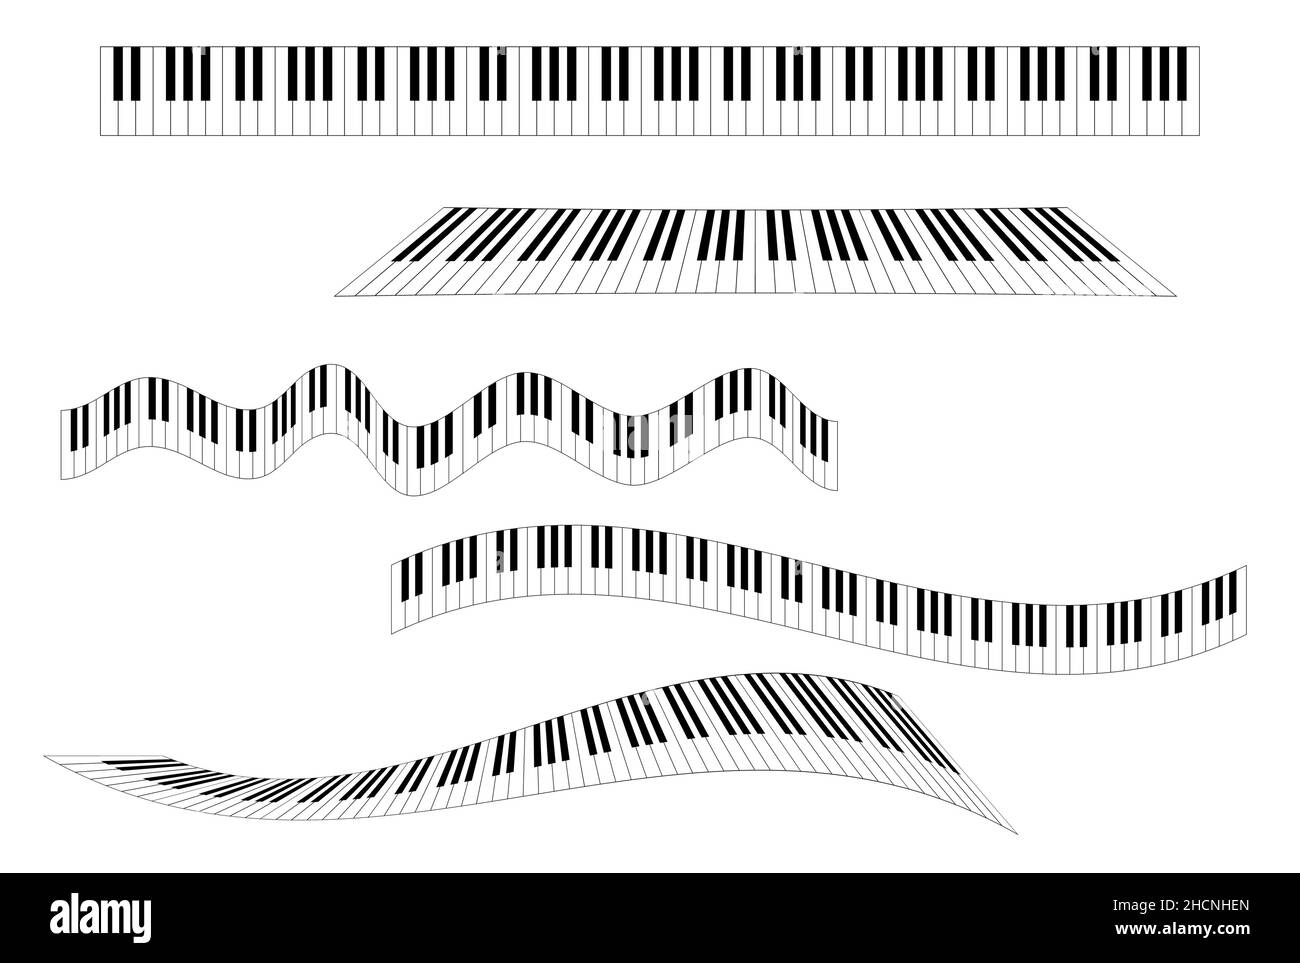 Piano keyboard variations collection - Vector Illustration Stock Vector